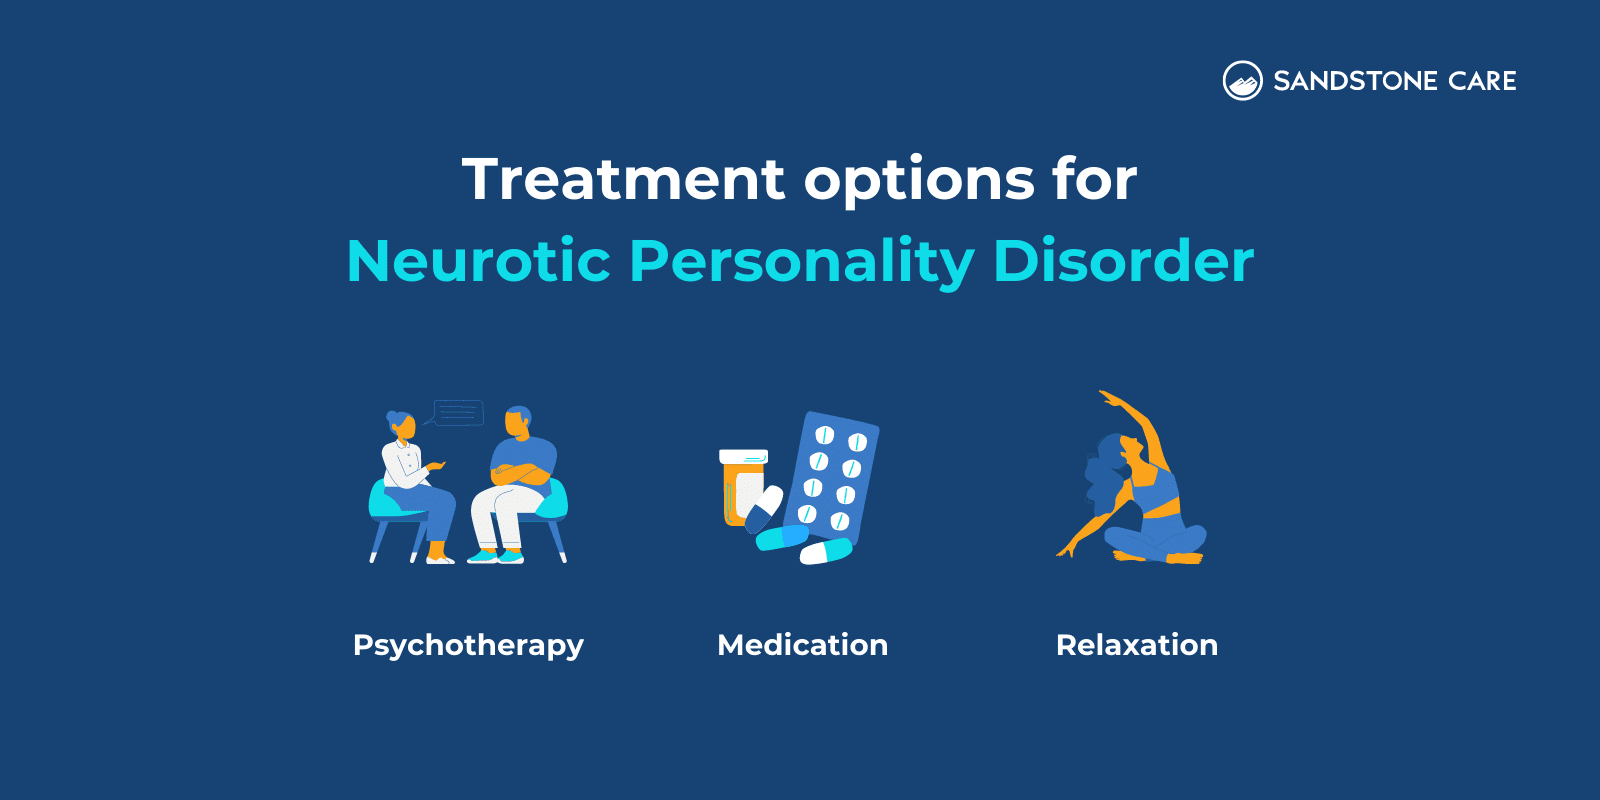 "Treatment options for Neurotic Personality Disorder" written above psychotherapy, medication, and relaxation treatment options with relevant illustrations